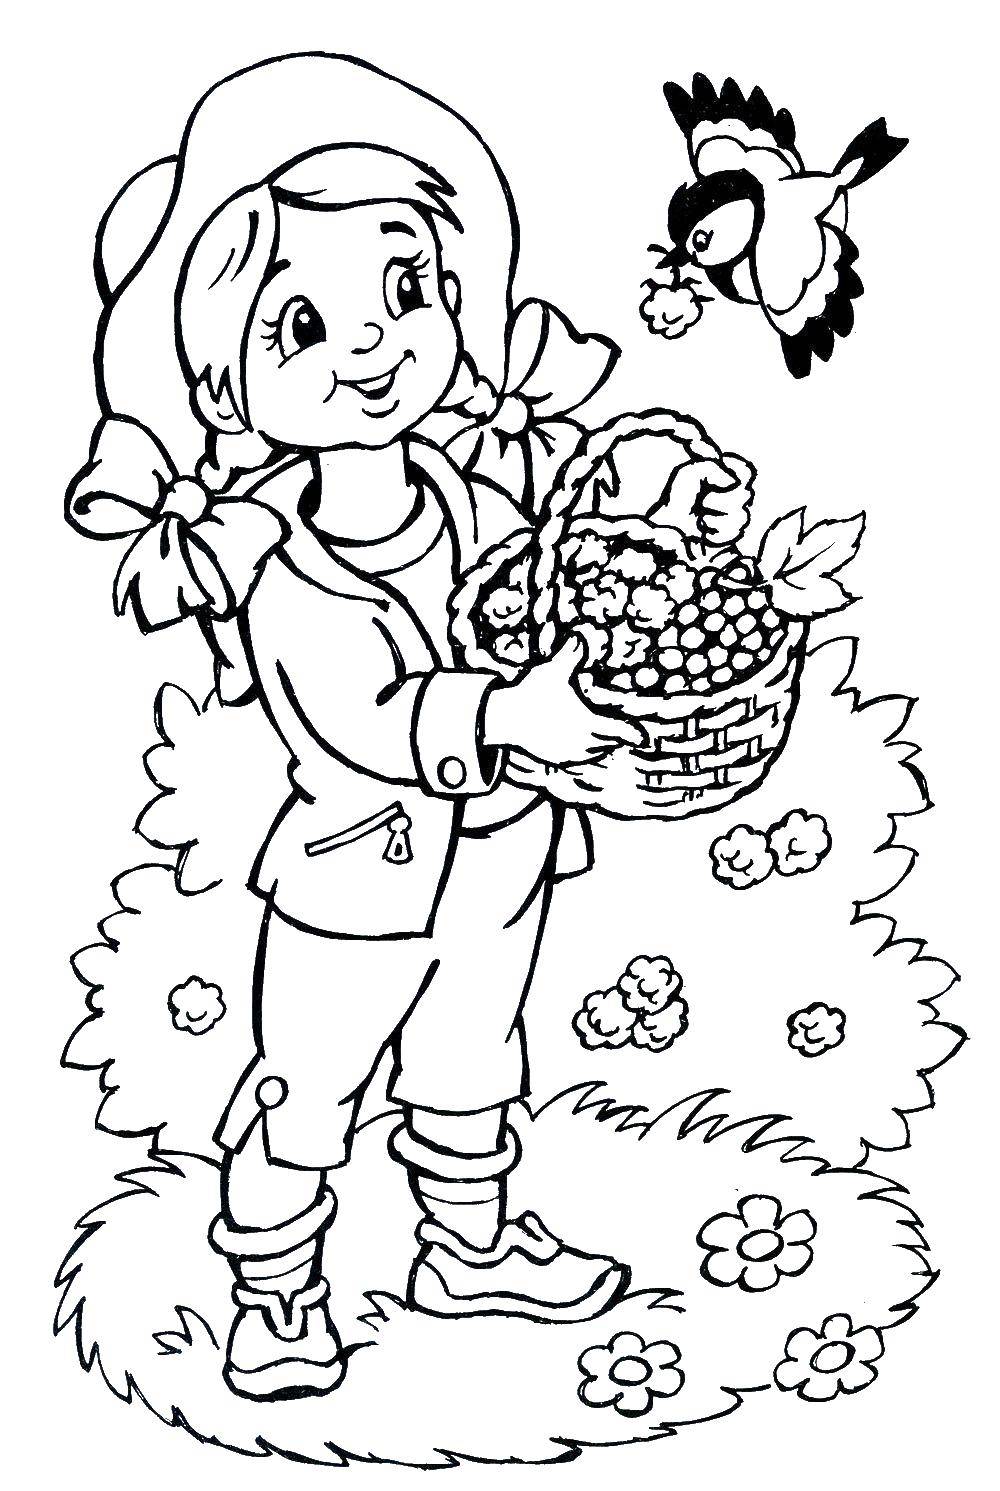 Coloring Girl with a basket of berries. Category People. Tags:  Girl , basket, bird.